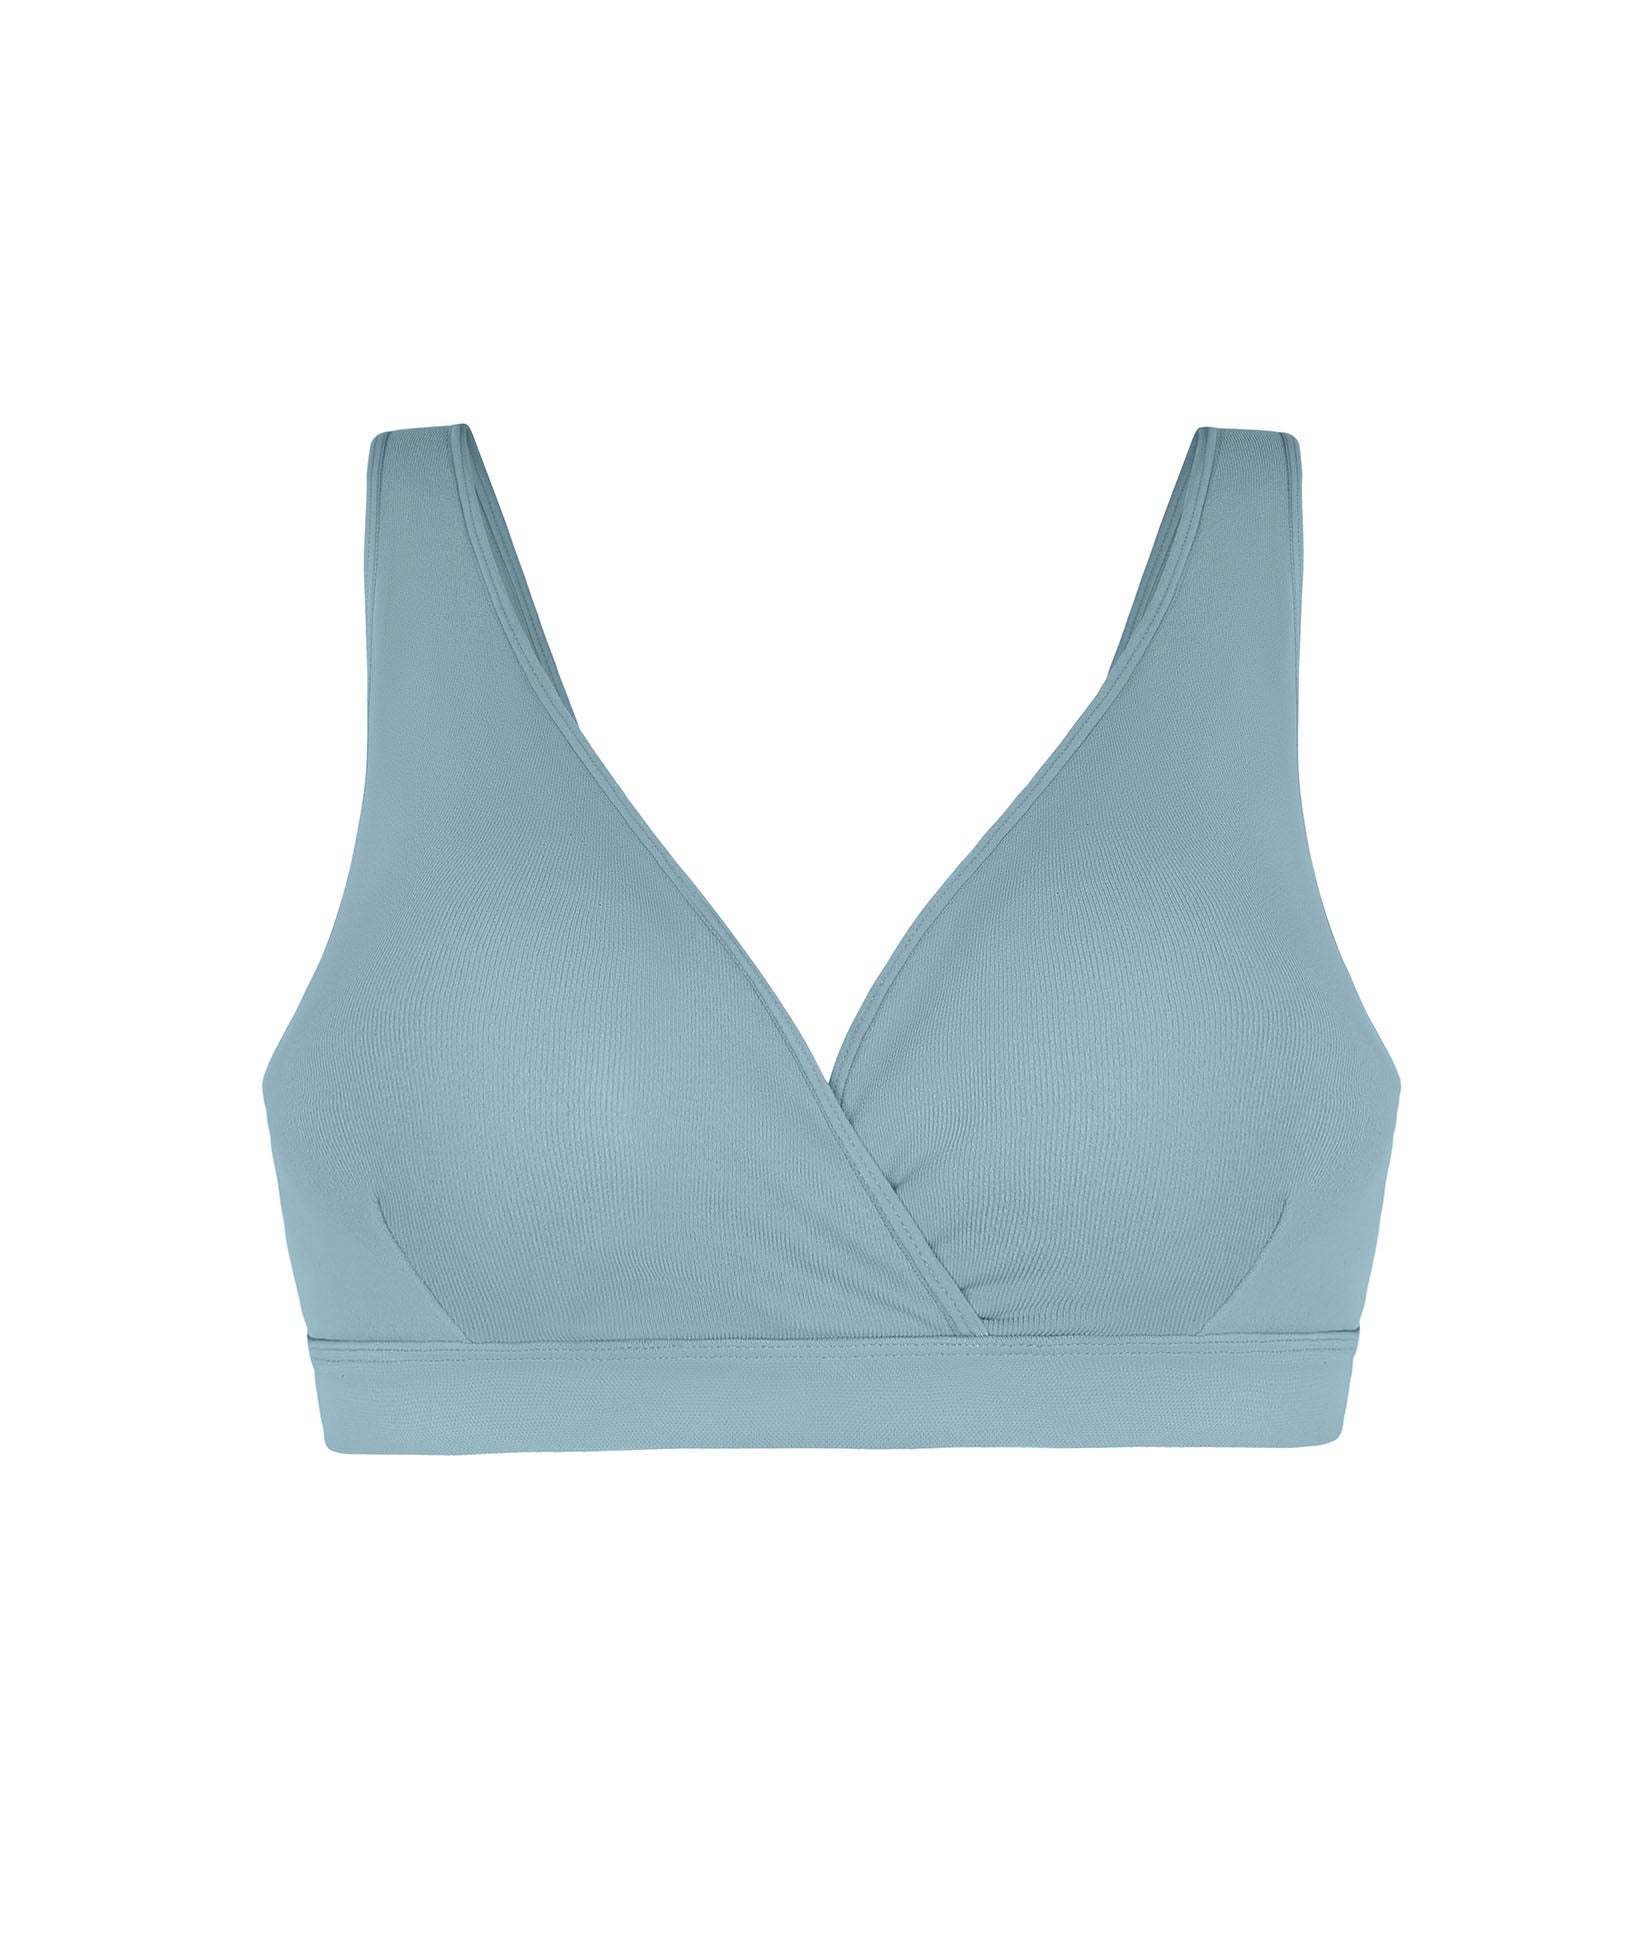 Comfy bra to easily style with!  Cosmolle Review & Try On ft. @Mimikickass  